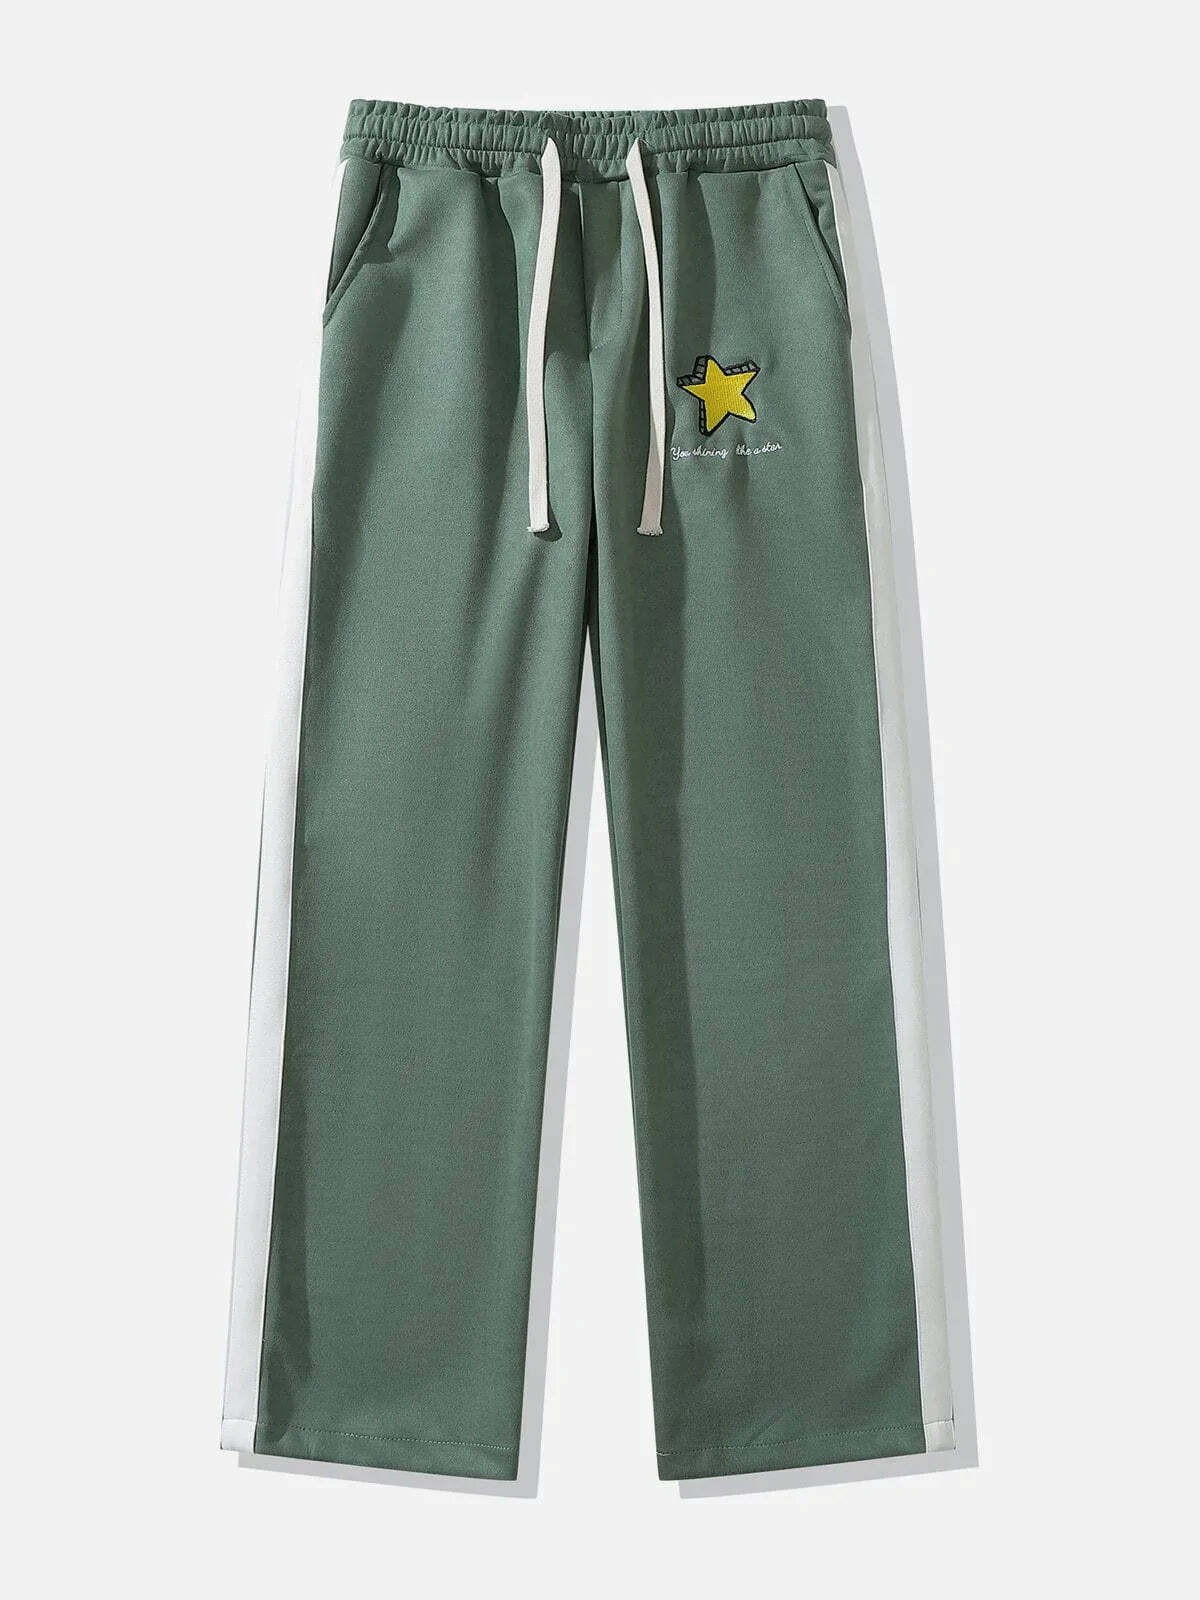 embroidered star cargo pants edgy streetwear essential 5675